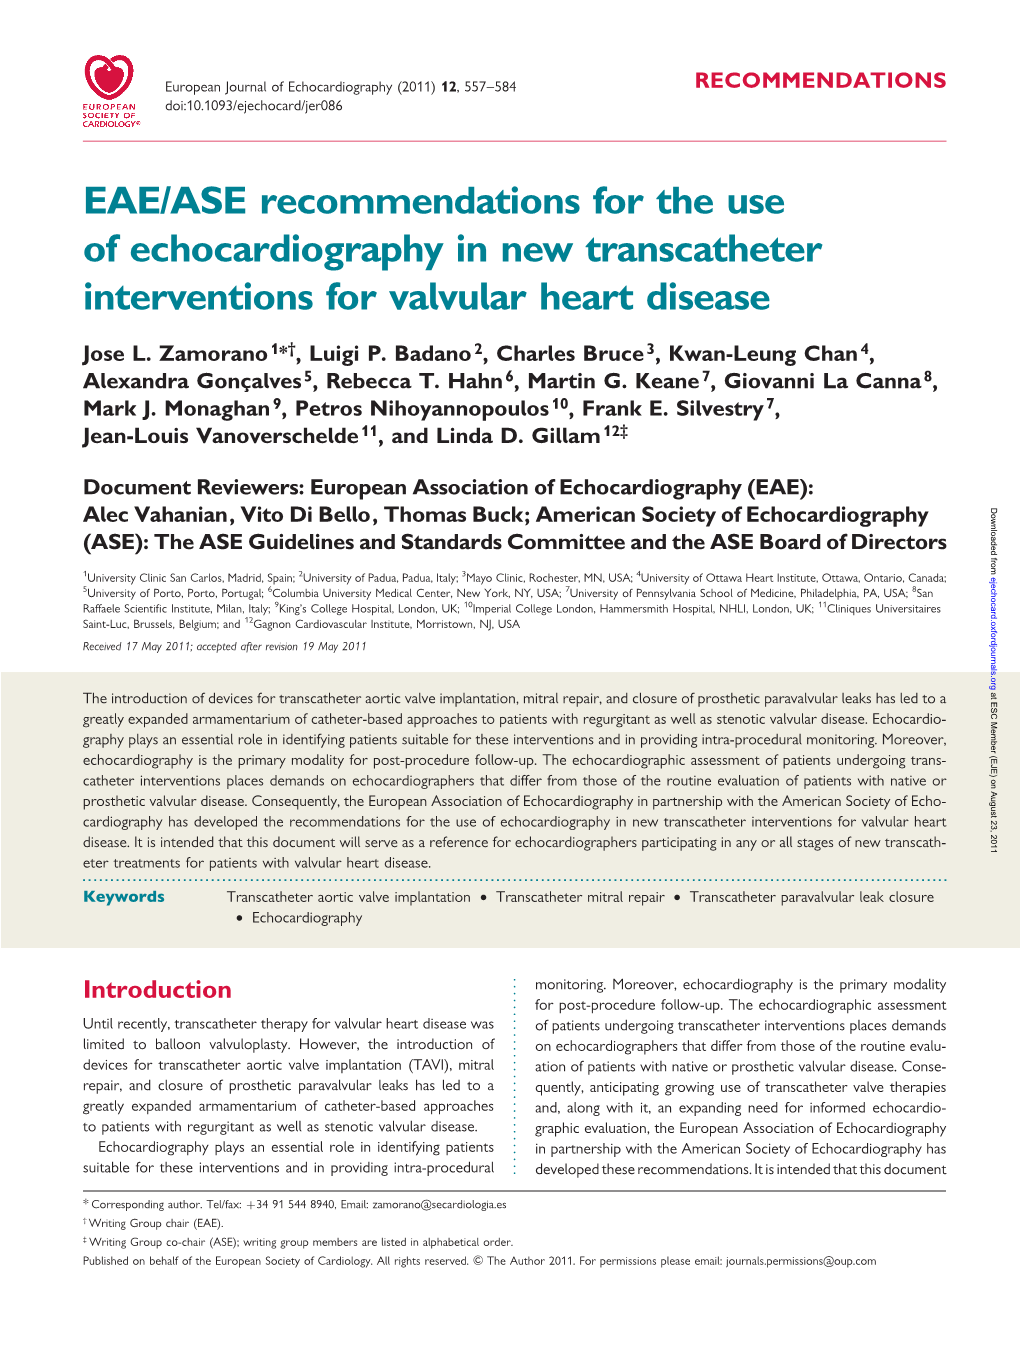 EAE/ASE Recommendations for the Use of Echocardiography in New Transcatheter Interventions for Valvular Heart Disease